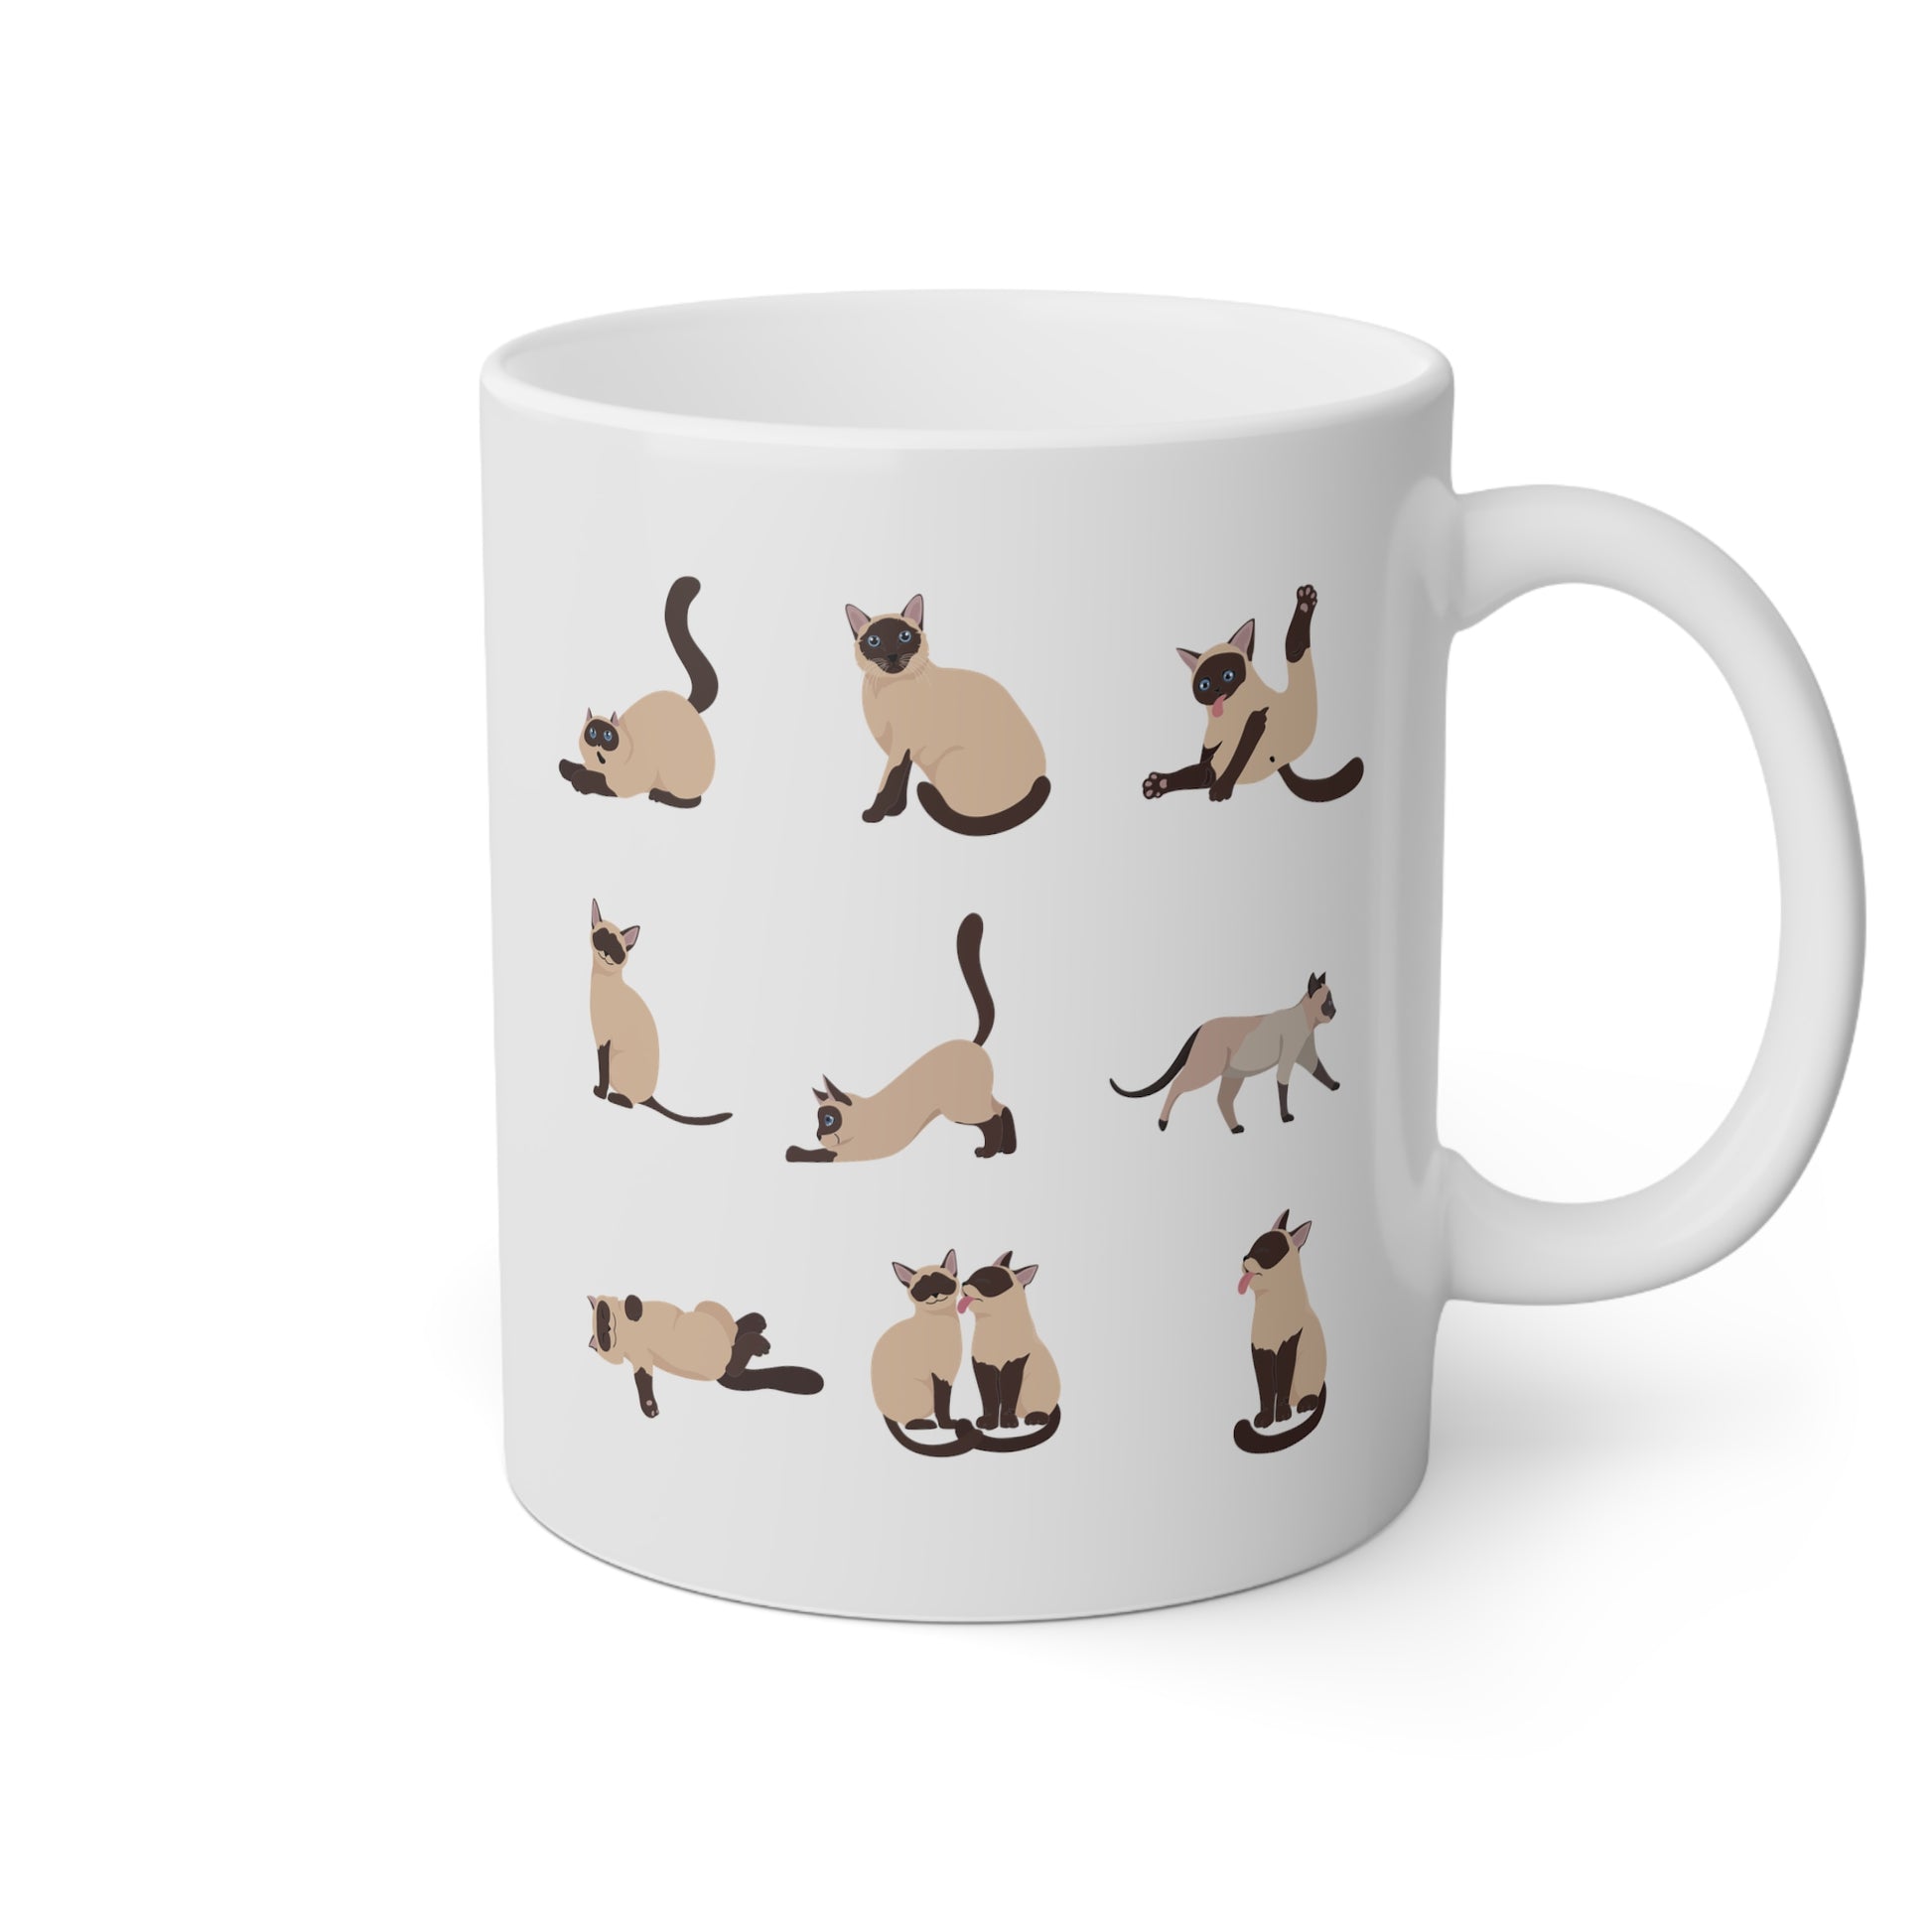 Siamese Cats 11oz white funny large coffee mug gift for cat mom cute kitten pet lover waveywares wavey wares wavywares wavy wares